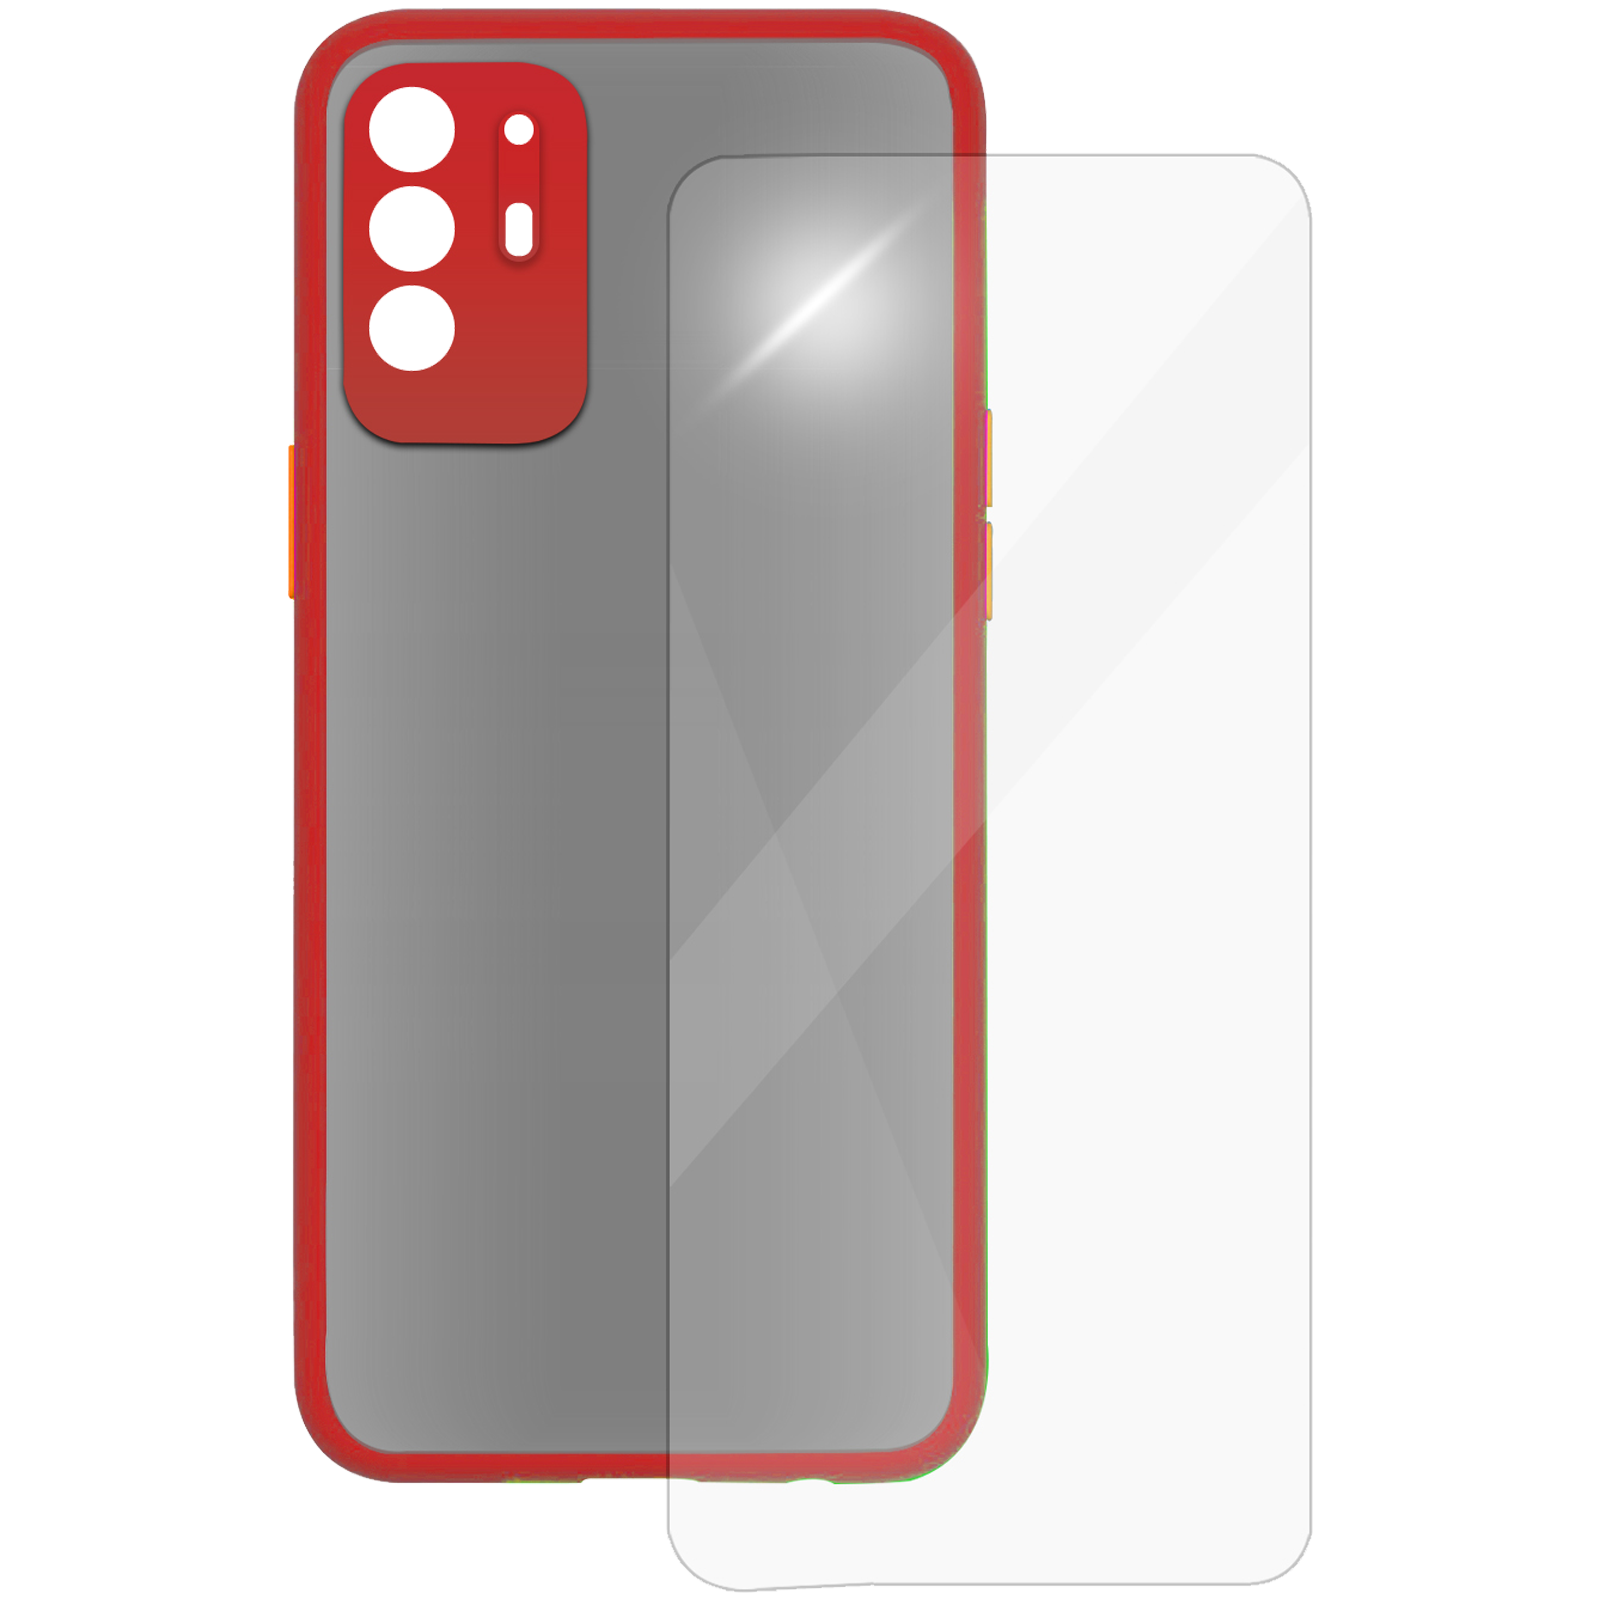 Arrow Camera Duplex Back Case and Screen Protector Bundle For Oppo F19 Pro+ (Ultra Transparent Visibility, AR-990, Red)_1